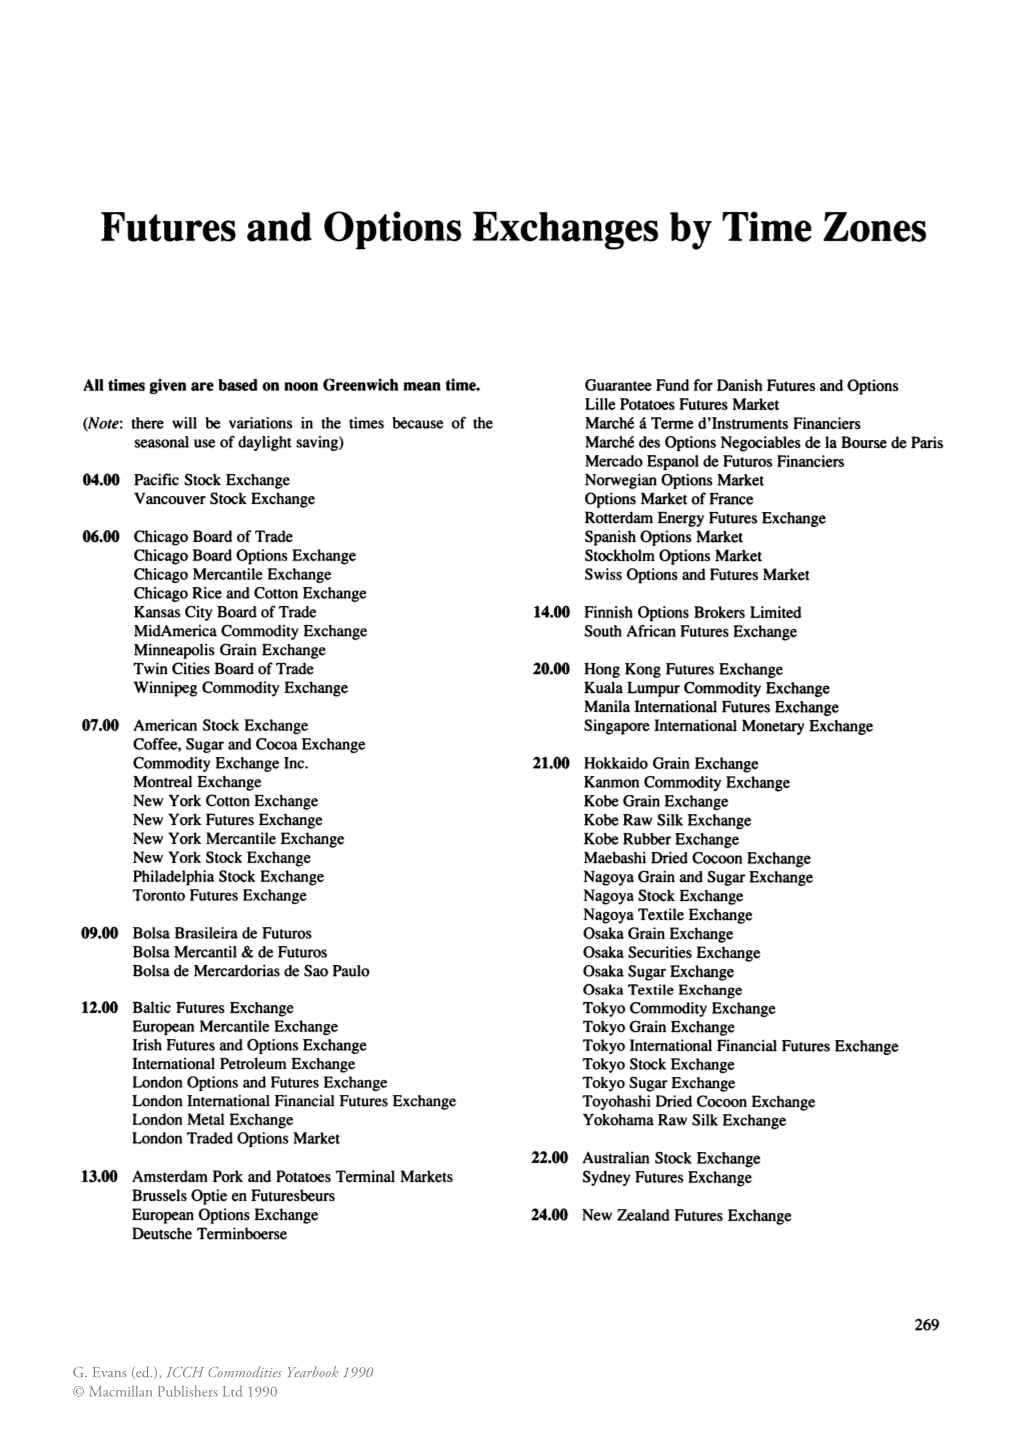 Futures and Options Exchanges by Time Zones